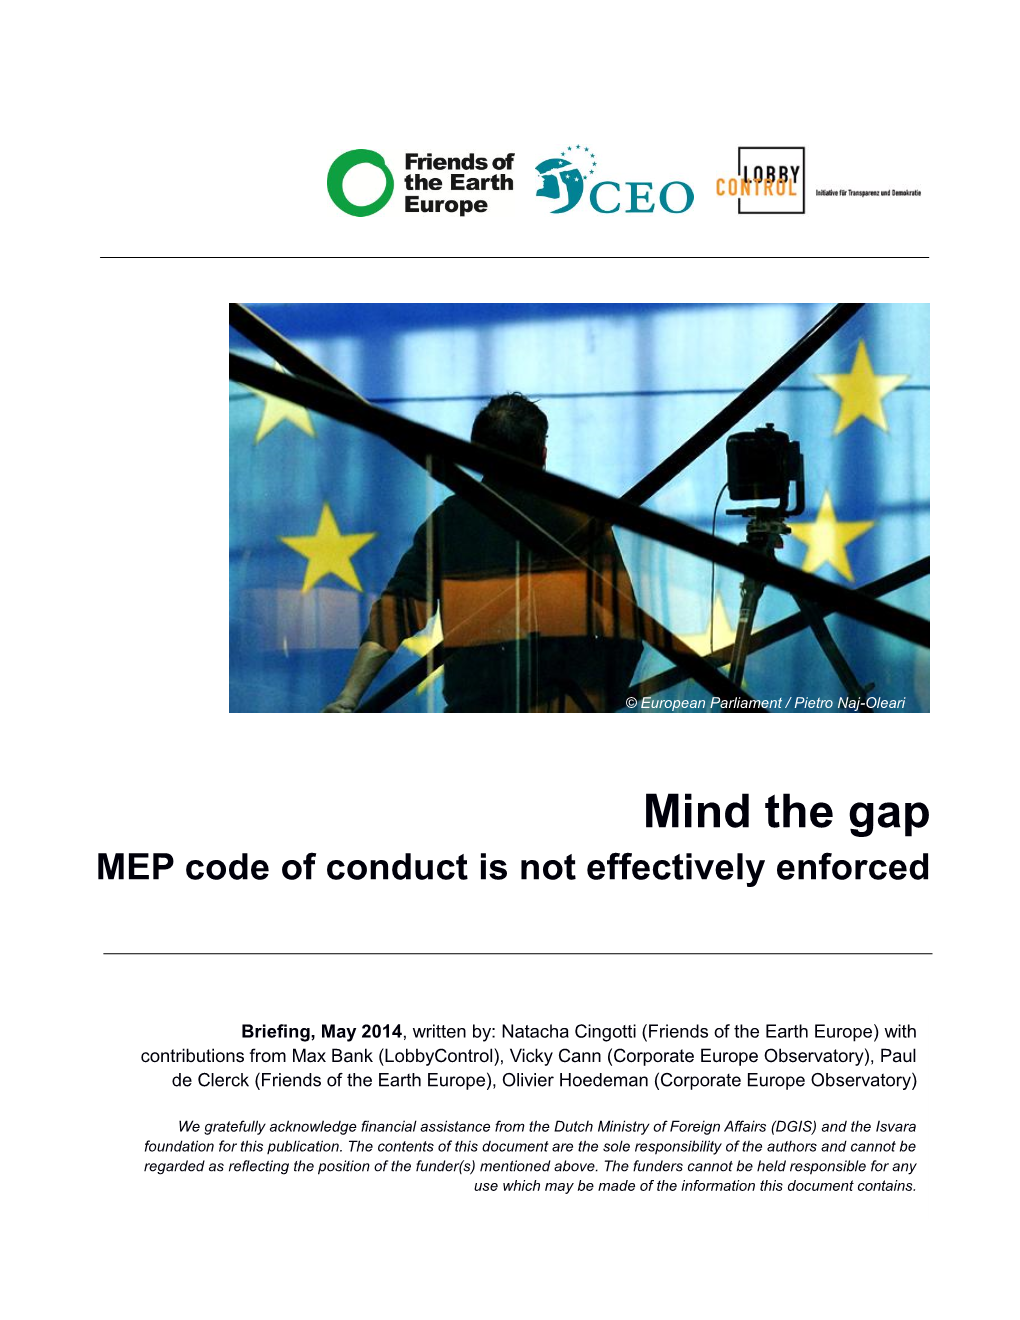 MEP Code of Conduct Is Not Effectively Enforced